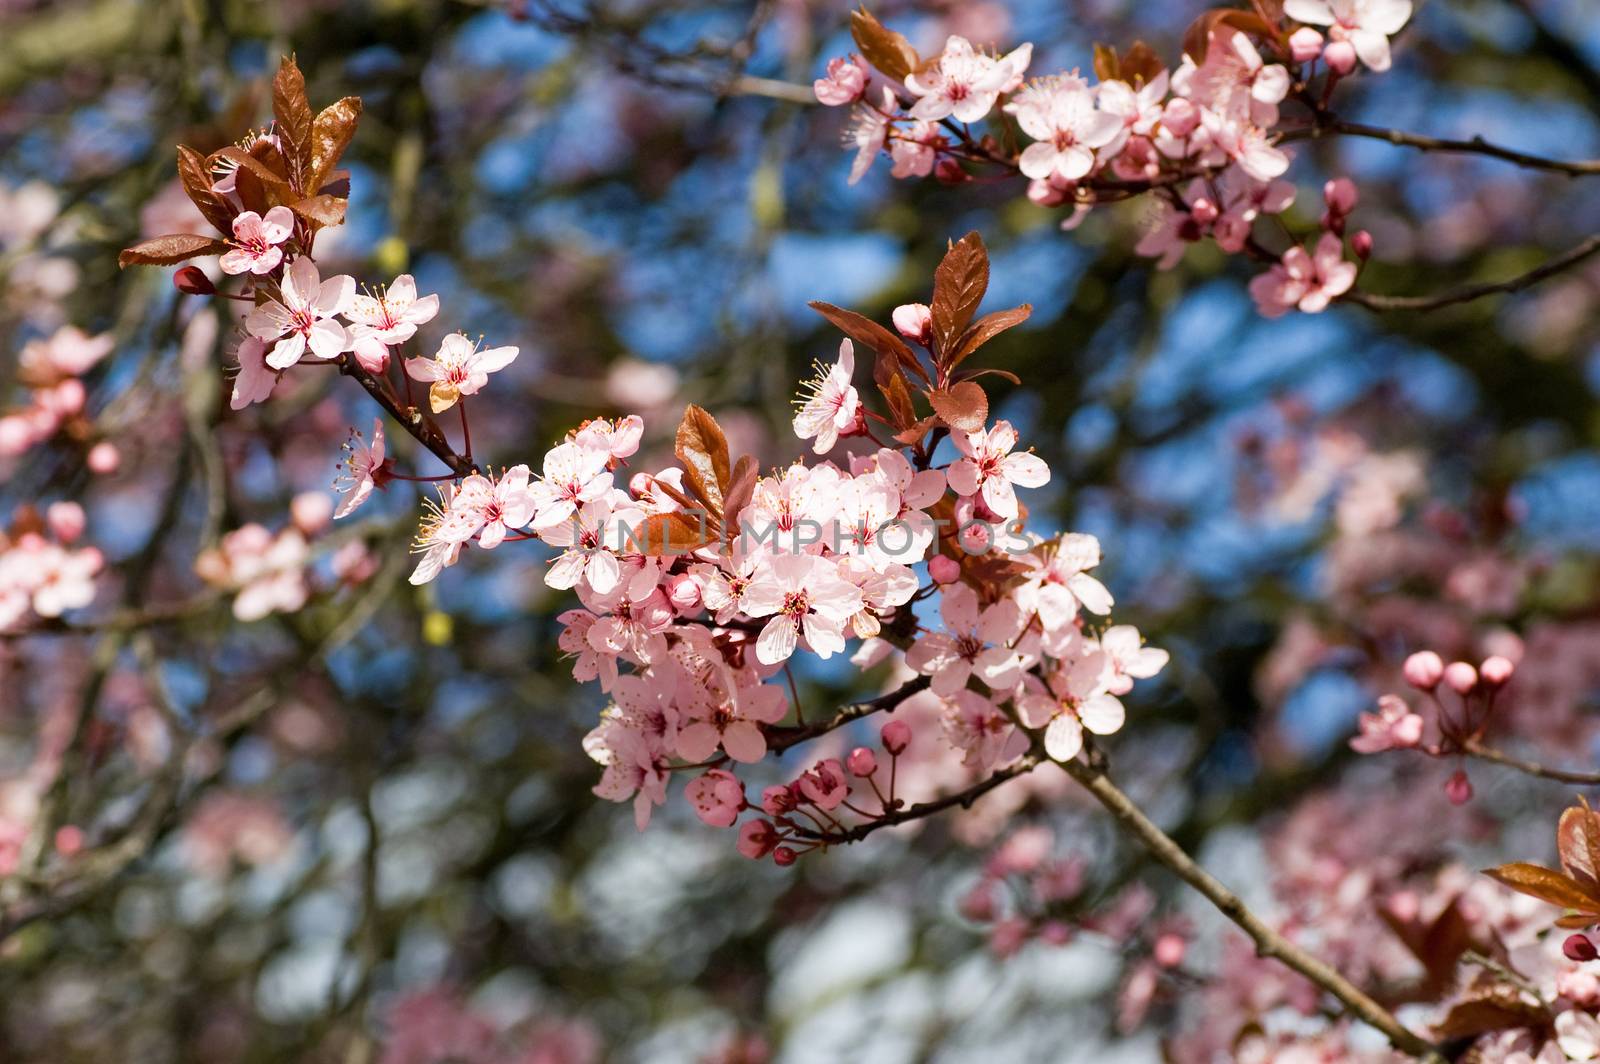 Clusters of flowering cherry blossom on a Prunus serrulata tree in Spring time.